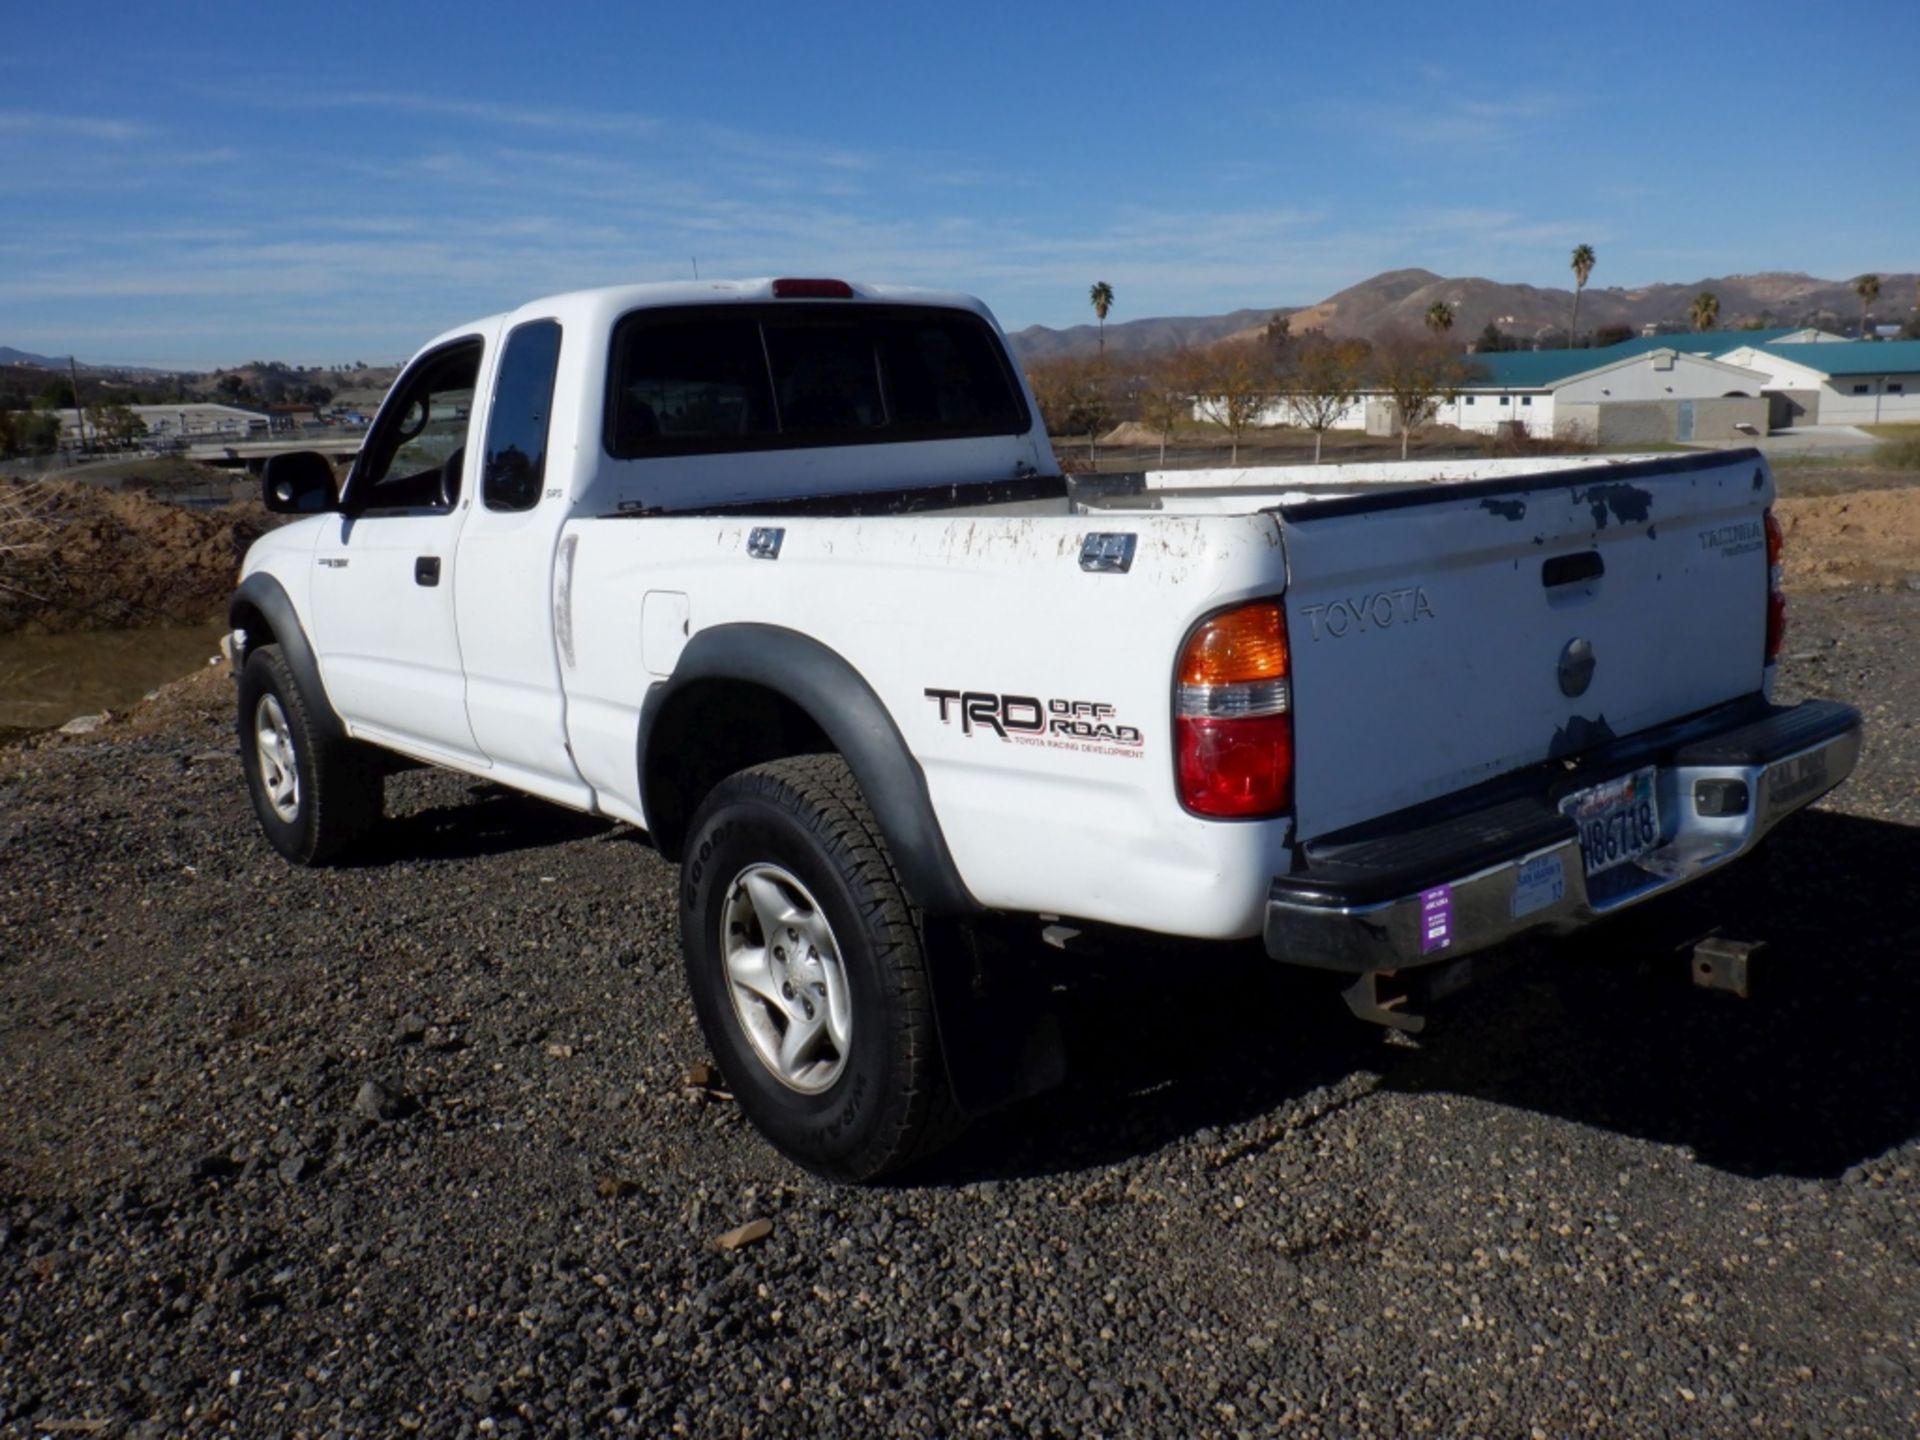 Toyota Tacoma TRD SR5 Extended Cab Pickup, - Image 7 of 52